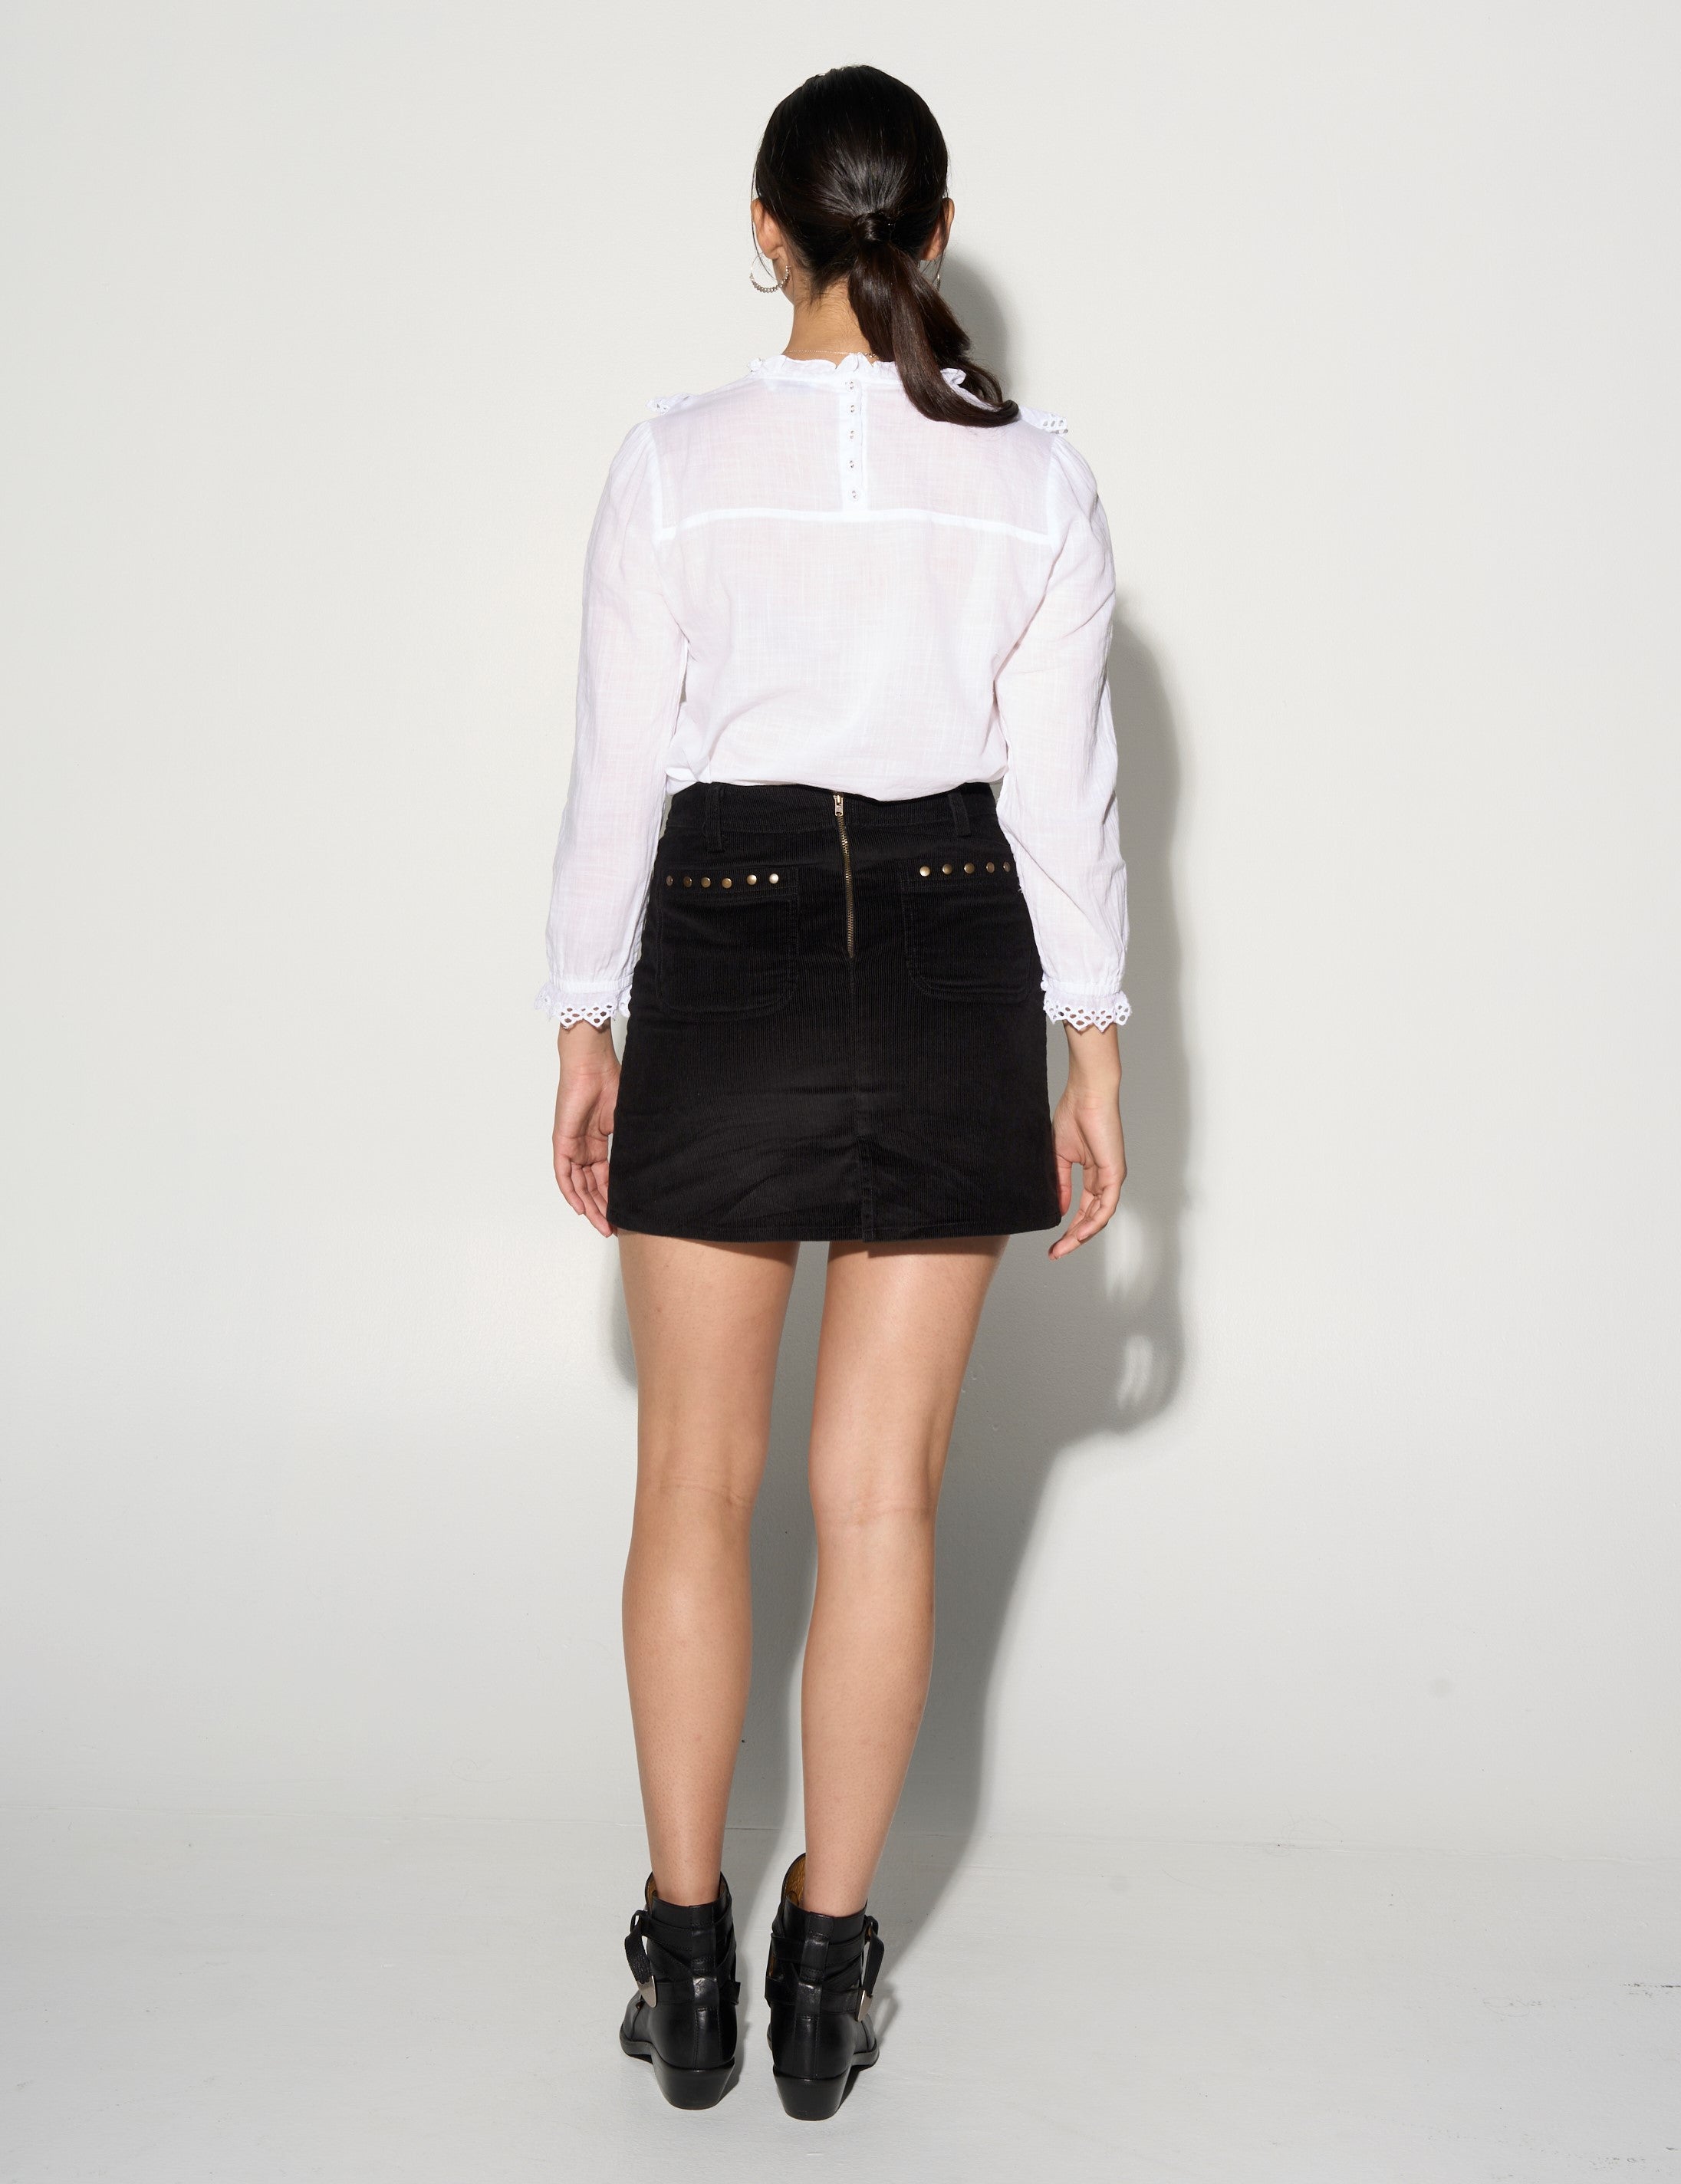 CLEMENCE pintucked Blouse with ruffles GILD